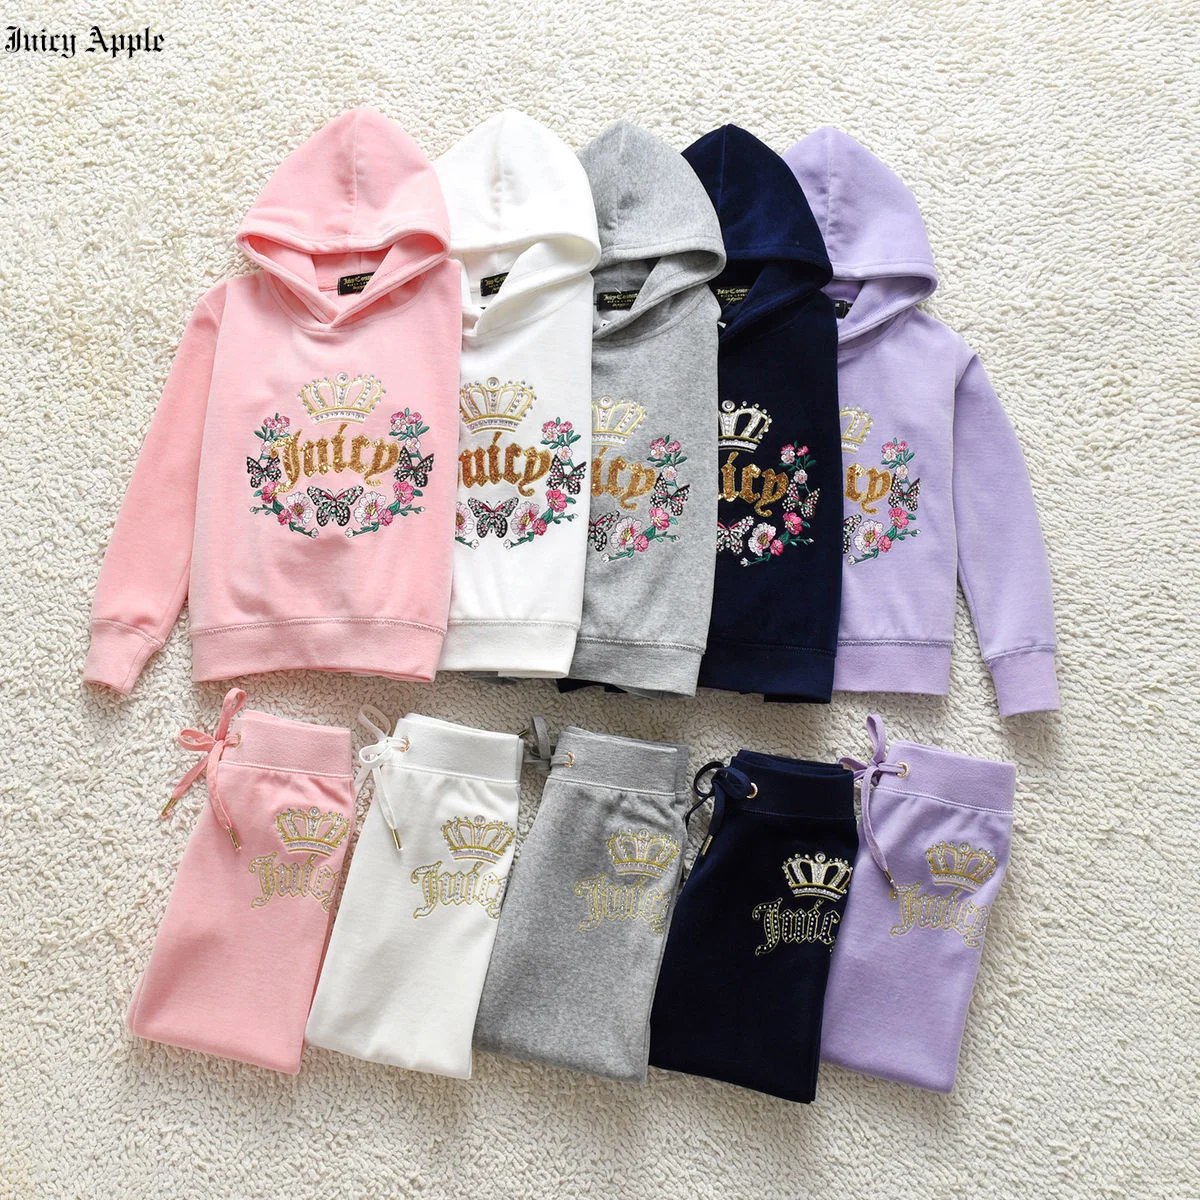 

Juicy Apple Kids Tracksuits Two Piece Set Children Sweatsuits Outsfits Hoodie Sweatshirts And Track Pants Spring Autumn Clothing